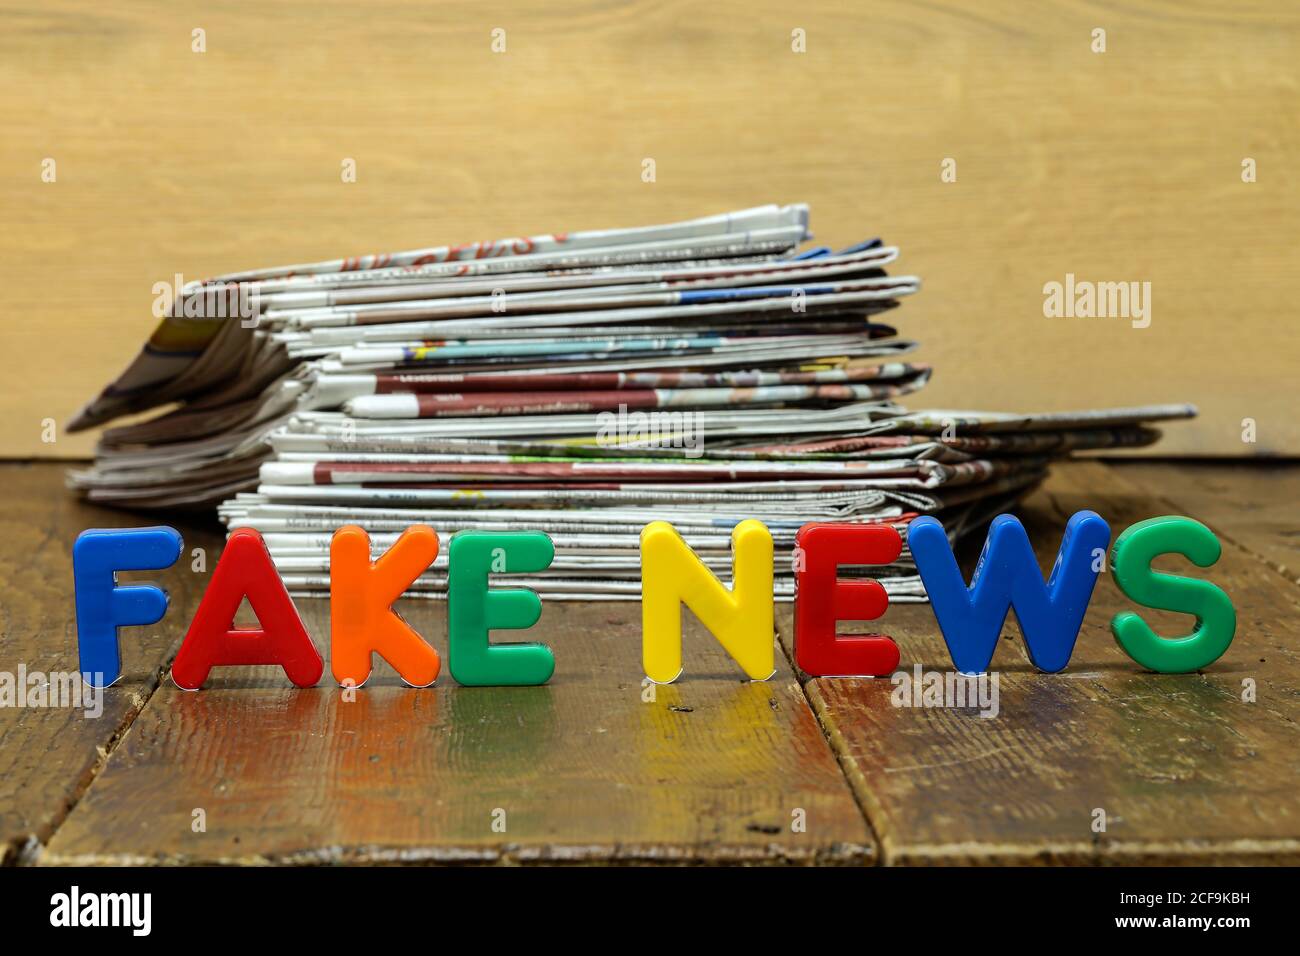 Closeup shot of Fake news concept with newspapers and letters. Stock Photo